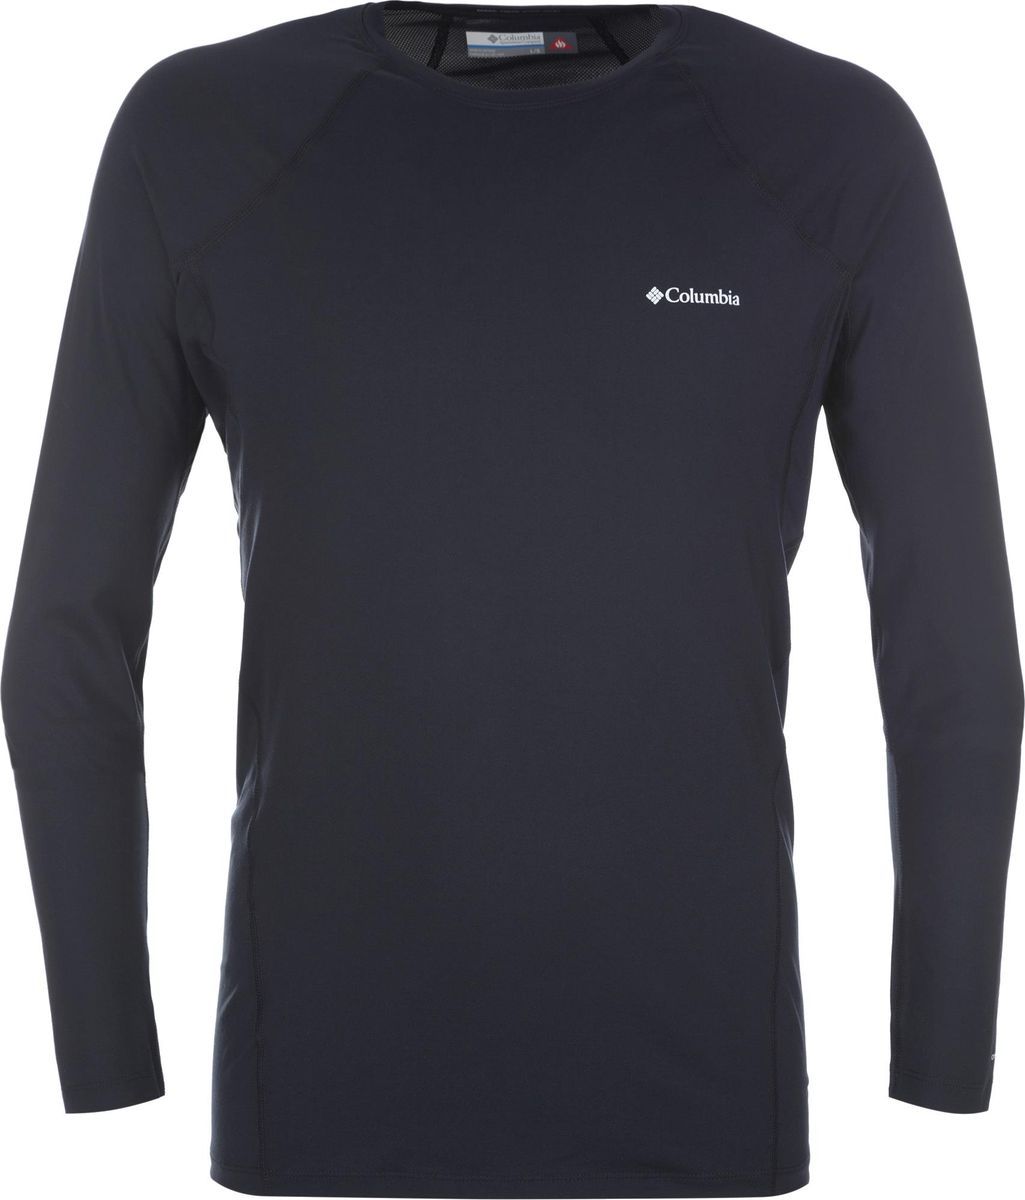   Columbia Midweight Stretch Long Sleeve Top, : . 1638591-010.  S (44/46)